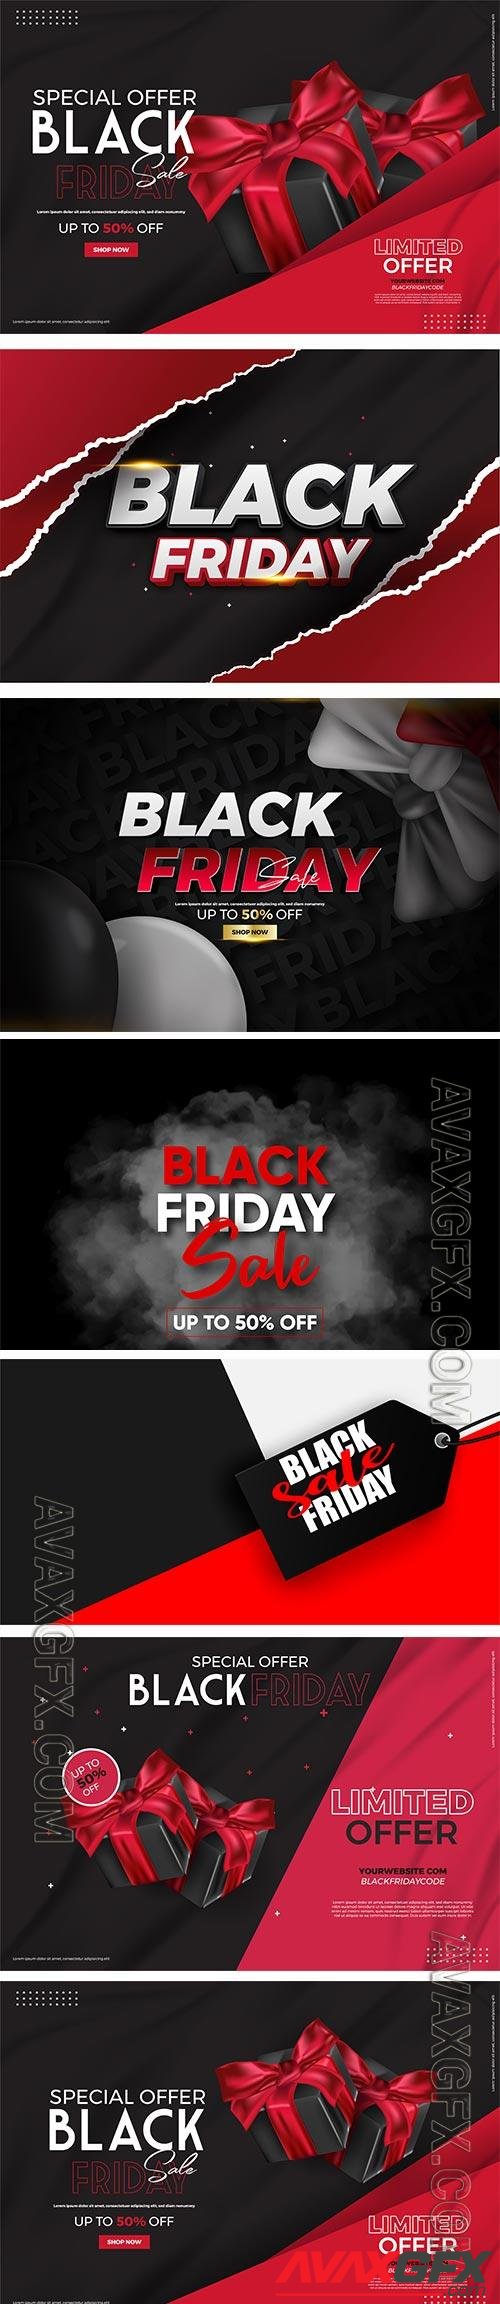 Black friday sale vector background with realistic 3d objects